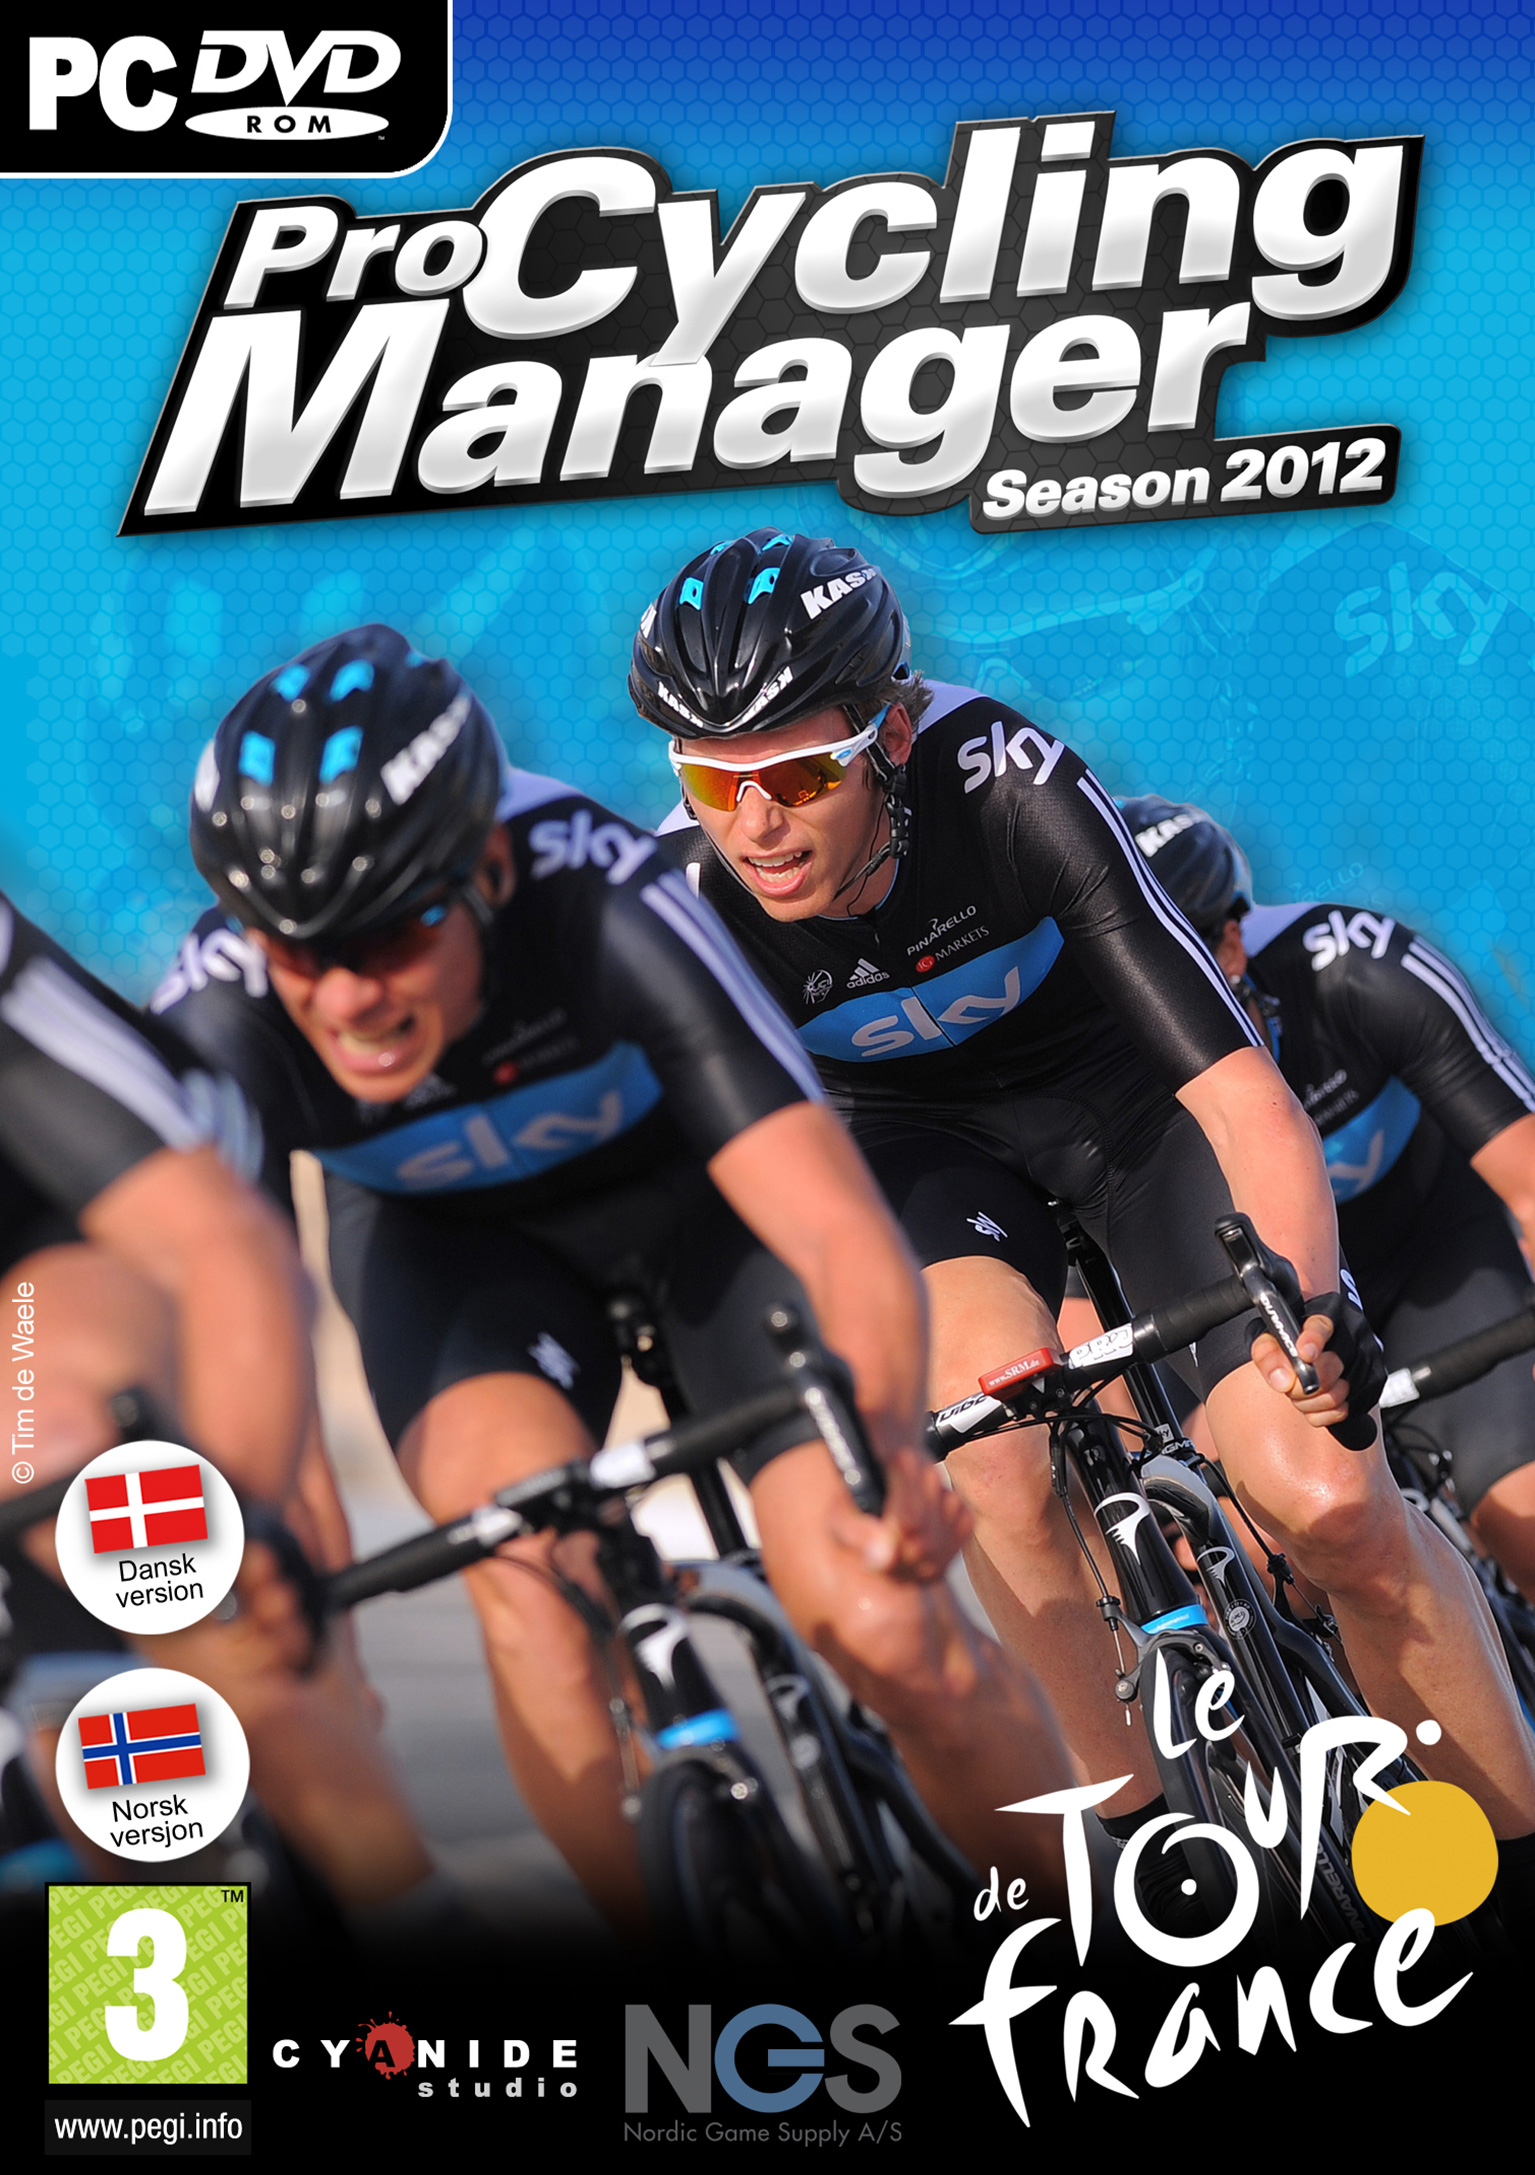 Pro Cycling Manager 2012 - pedn DVD obal 2